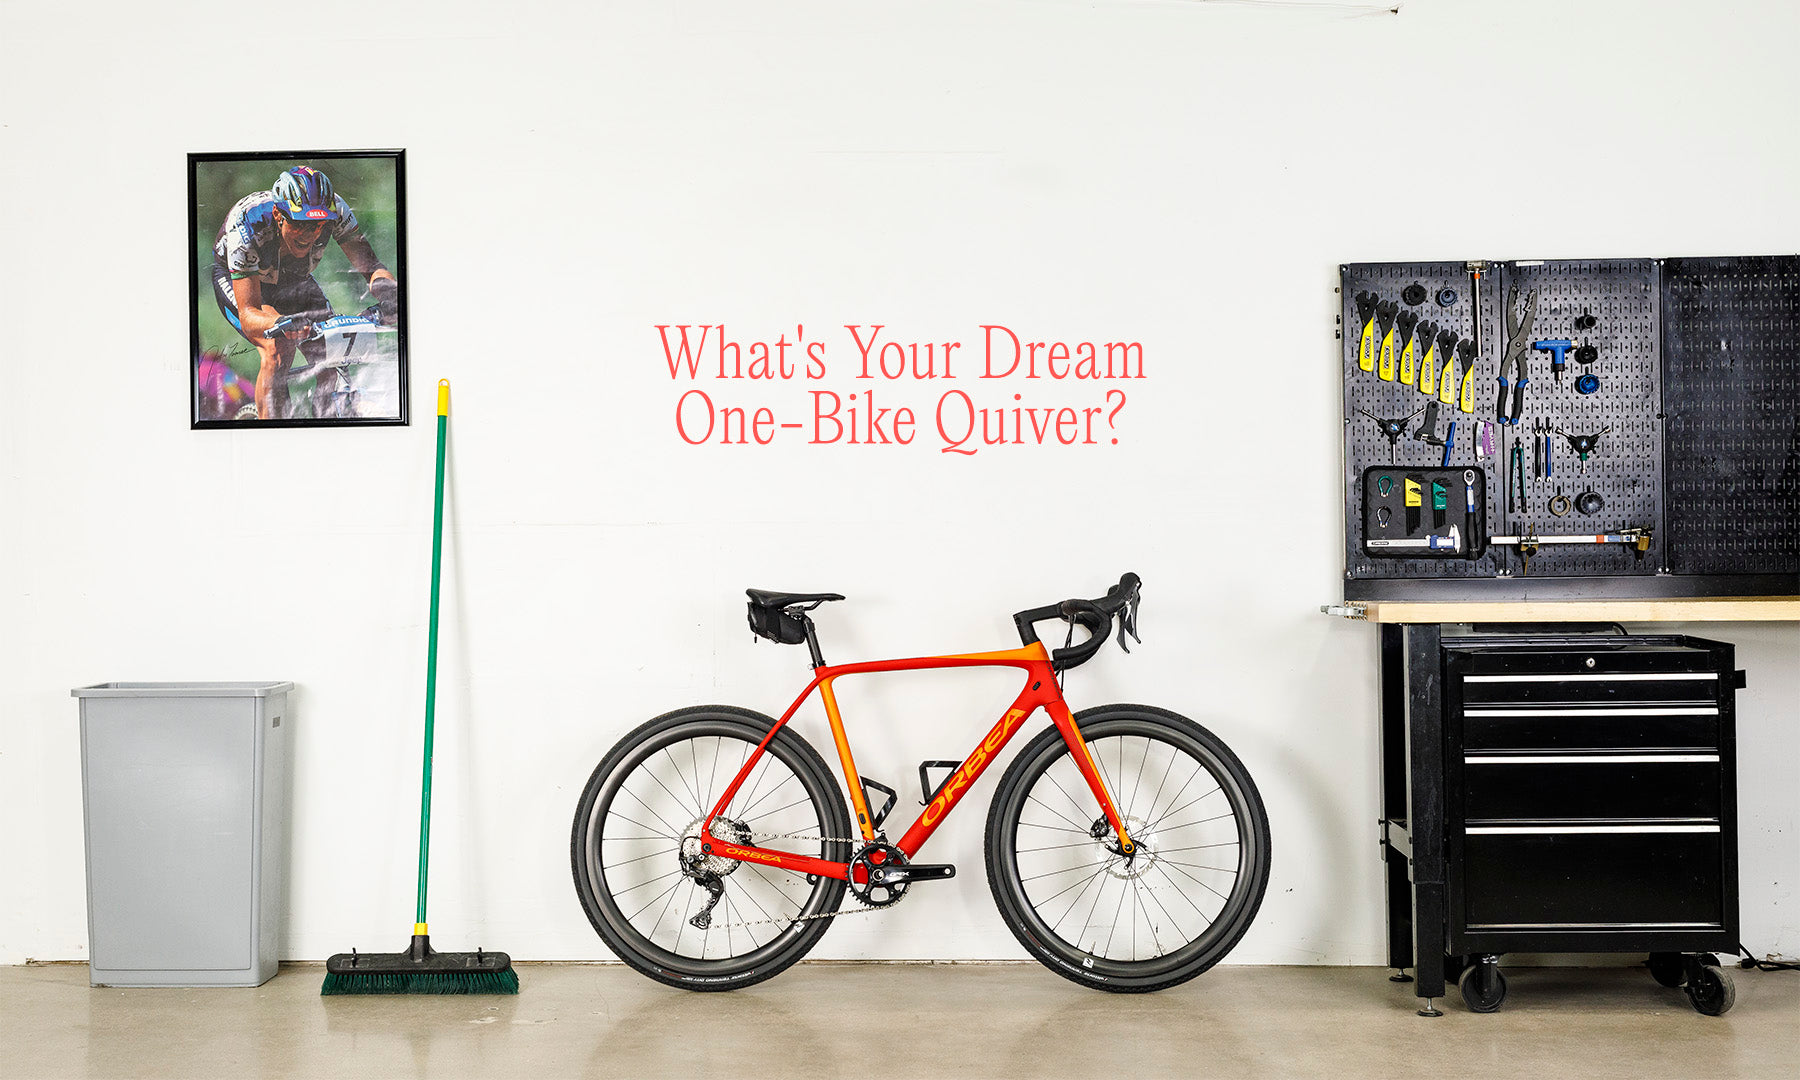 Q: What's Your Dream One-Bike Quiver?